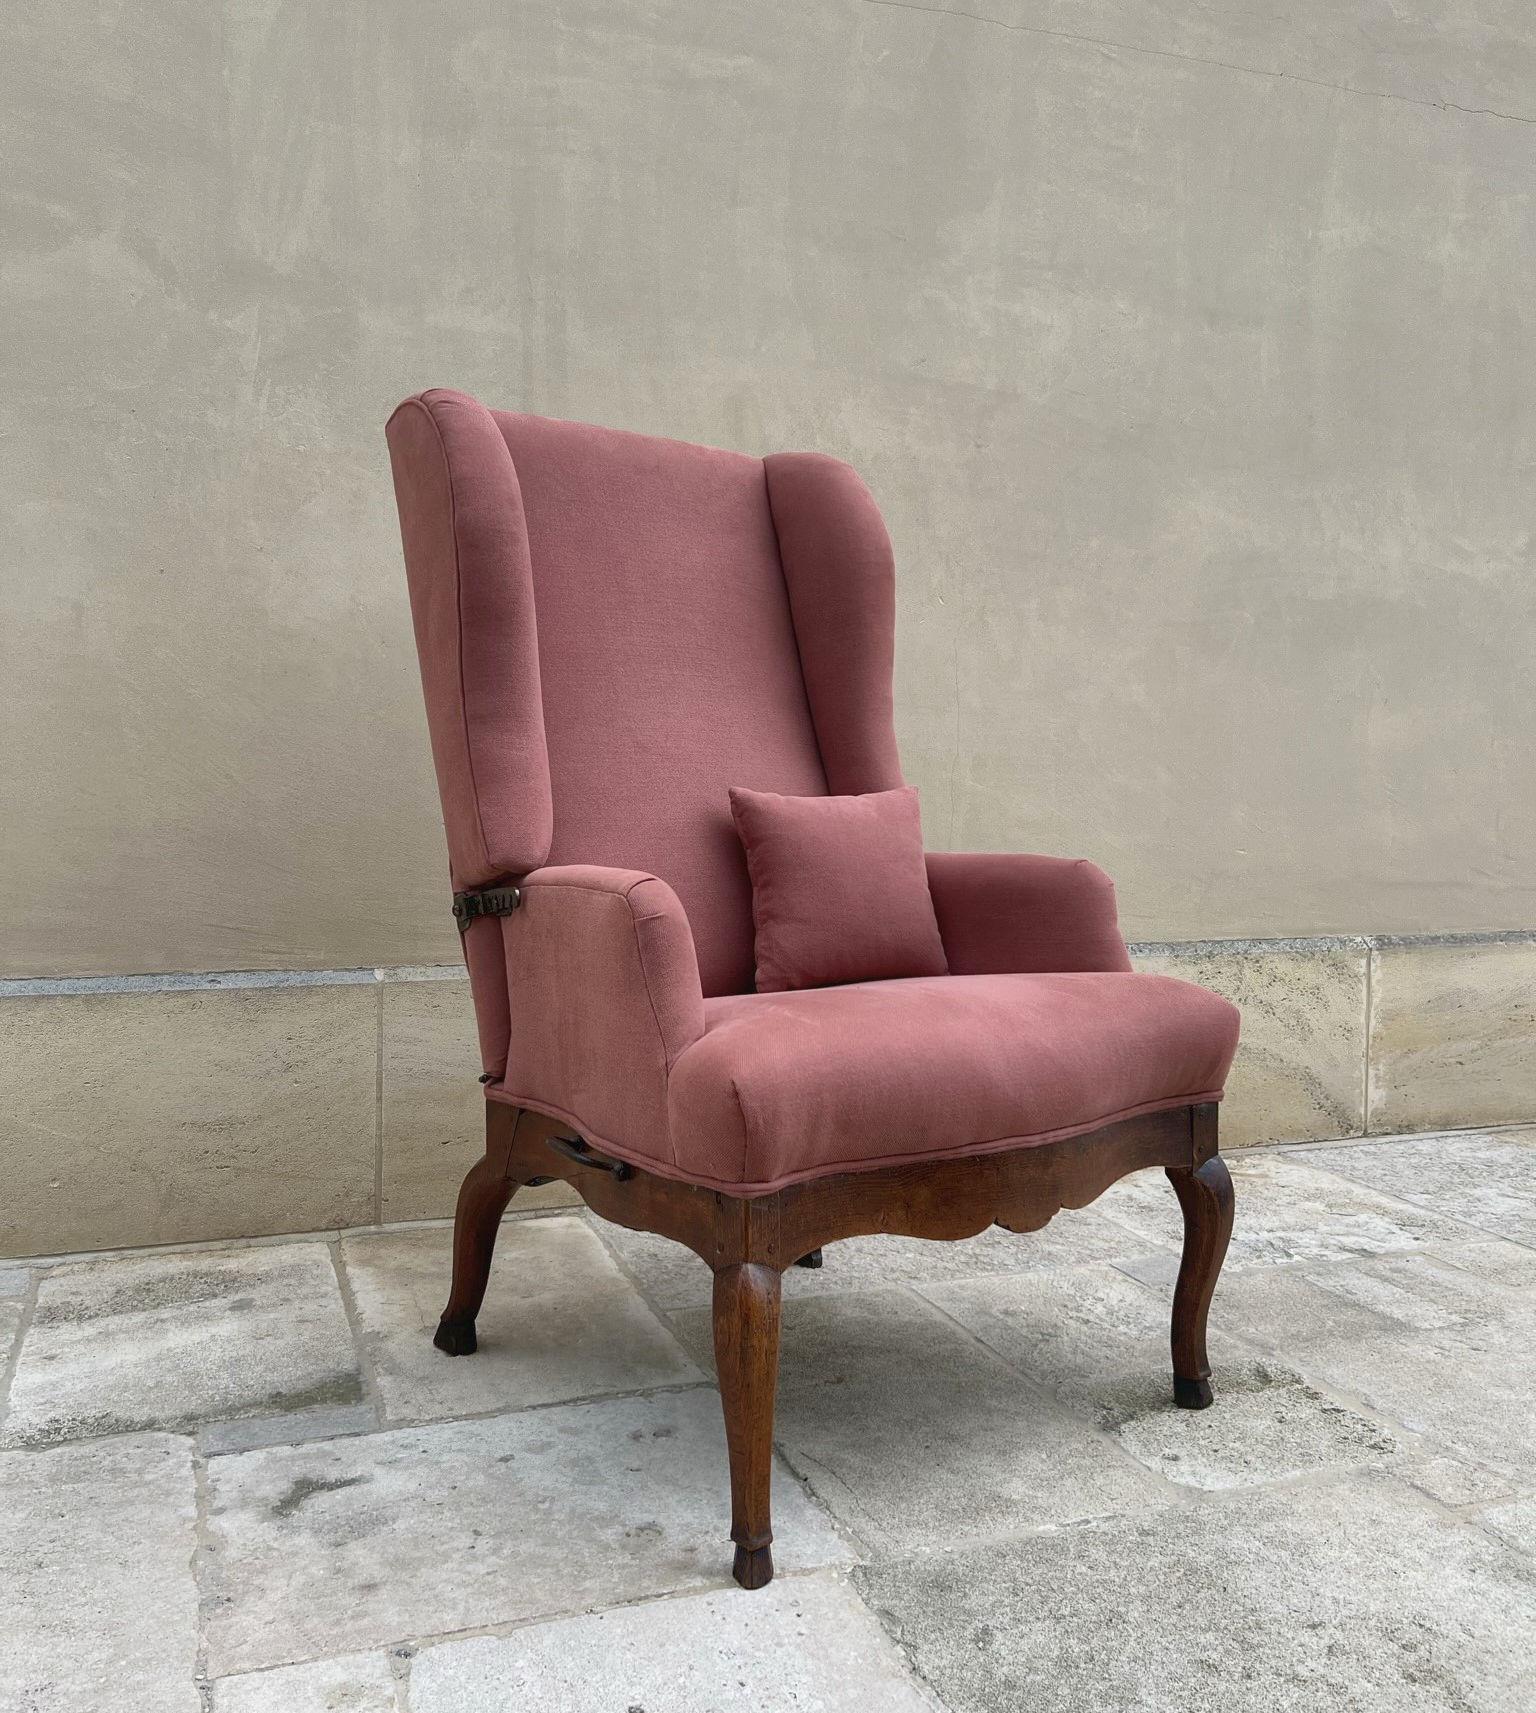 This type of French reclining armchair is also called 'Fauteuil' a Crémallaire, de malade or Molière chair. Crémaillère stands for the iron brackets which make reclining possible, de malade or Molière because they were made to take a nap without